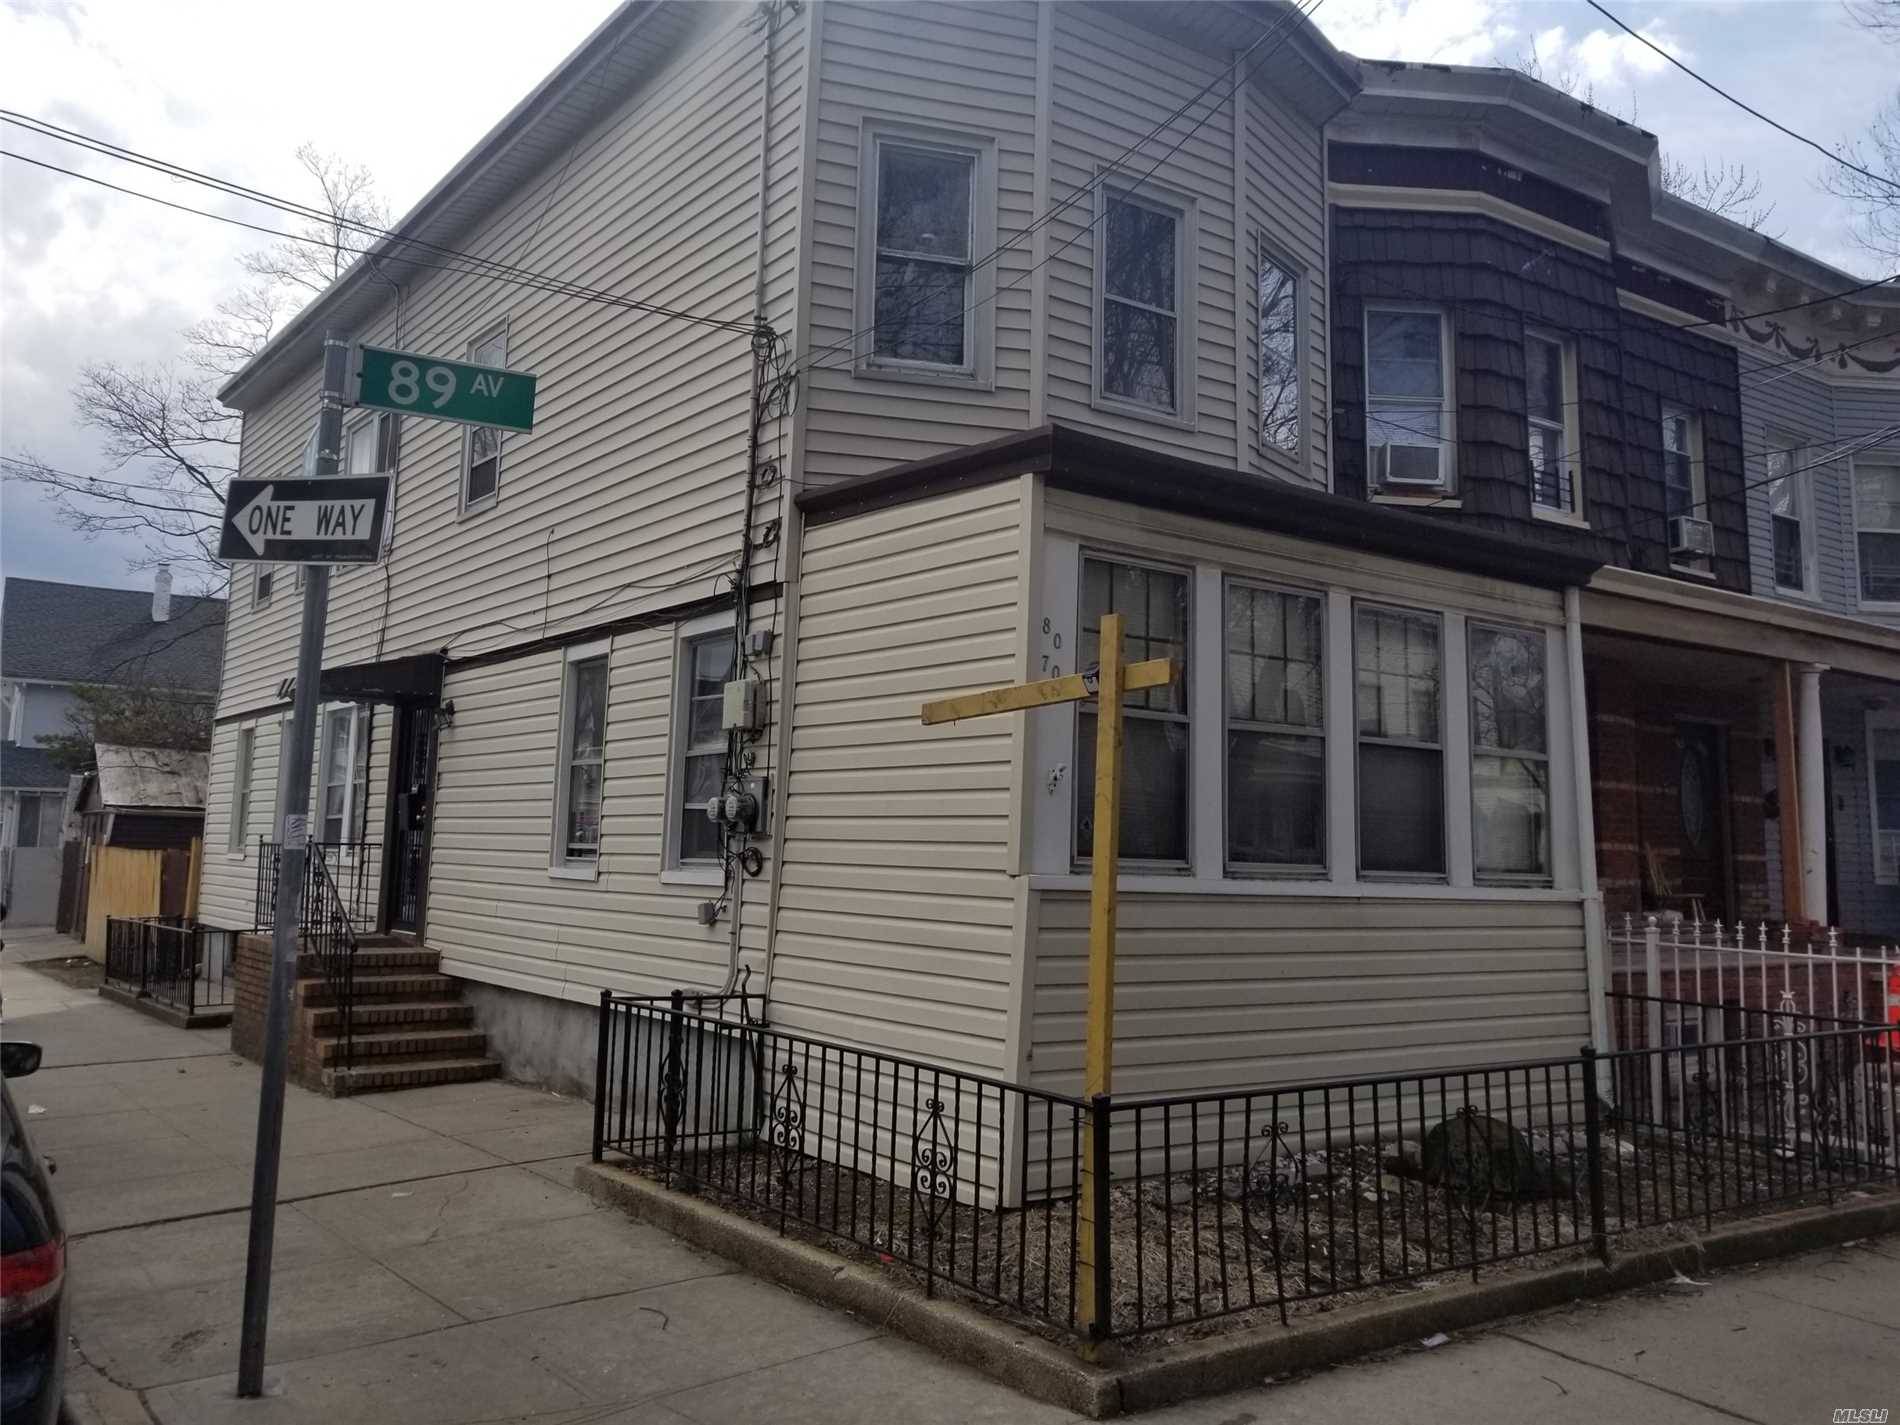 Corner House Offering Modest 3 Bedrooms Over 3 Bedrooms With A Full Finished Basement W Ose, Detached 2 Car Garage, Walk To Local Shopping, House Of Worship, Public Transportation, Private ...